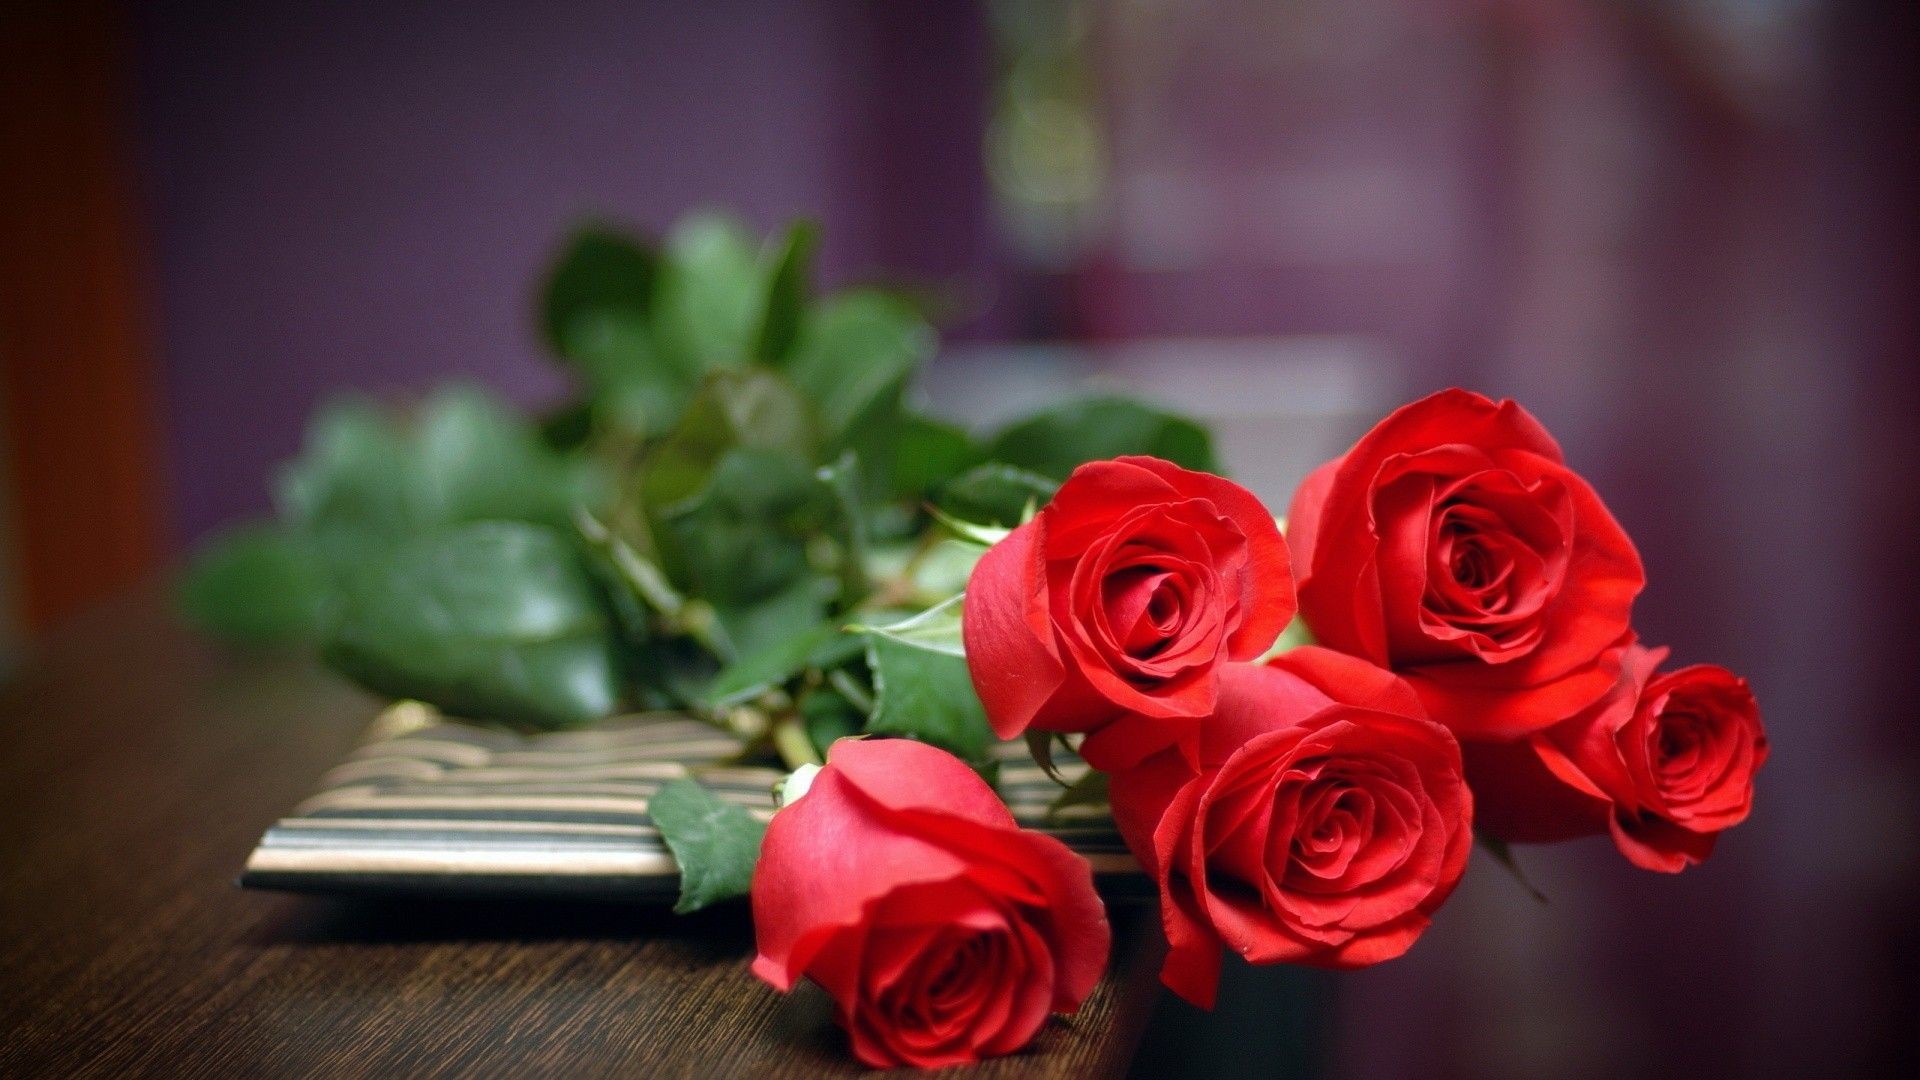 1920x1080 ... Red And Black Rose Wallpapers 13 Free Hd Wallpaper .